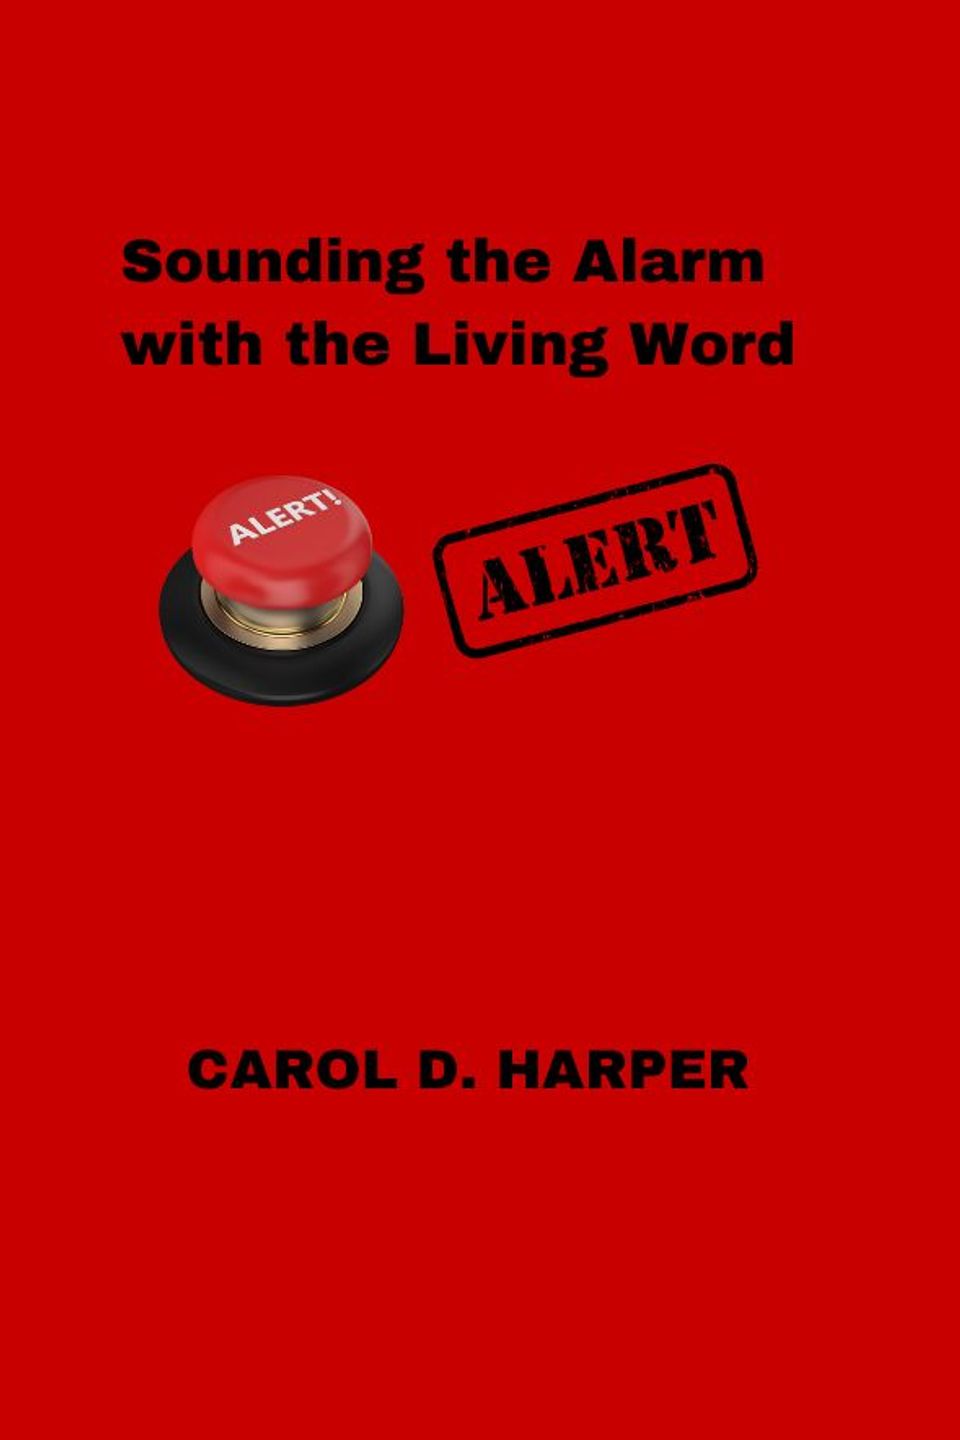  bc  511  sounding the alarm with the living word (6.14 × 9.21 in).pdf